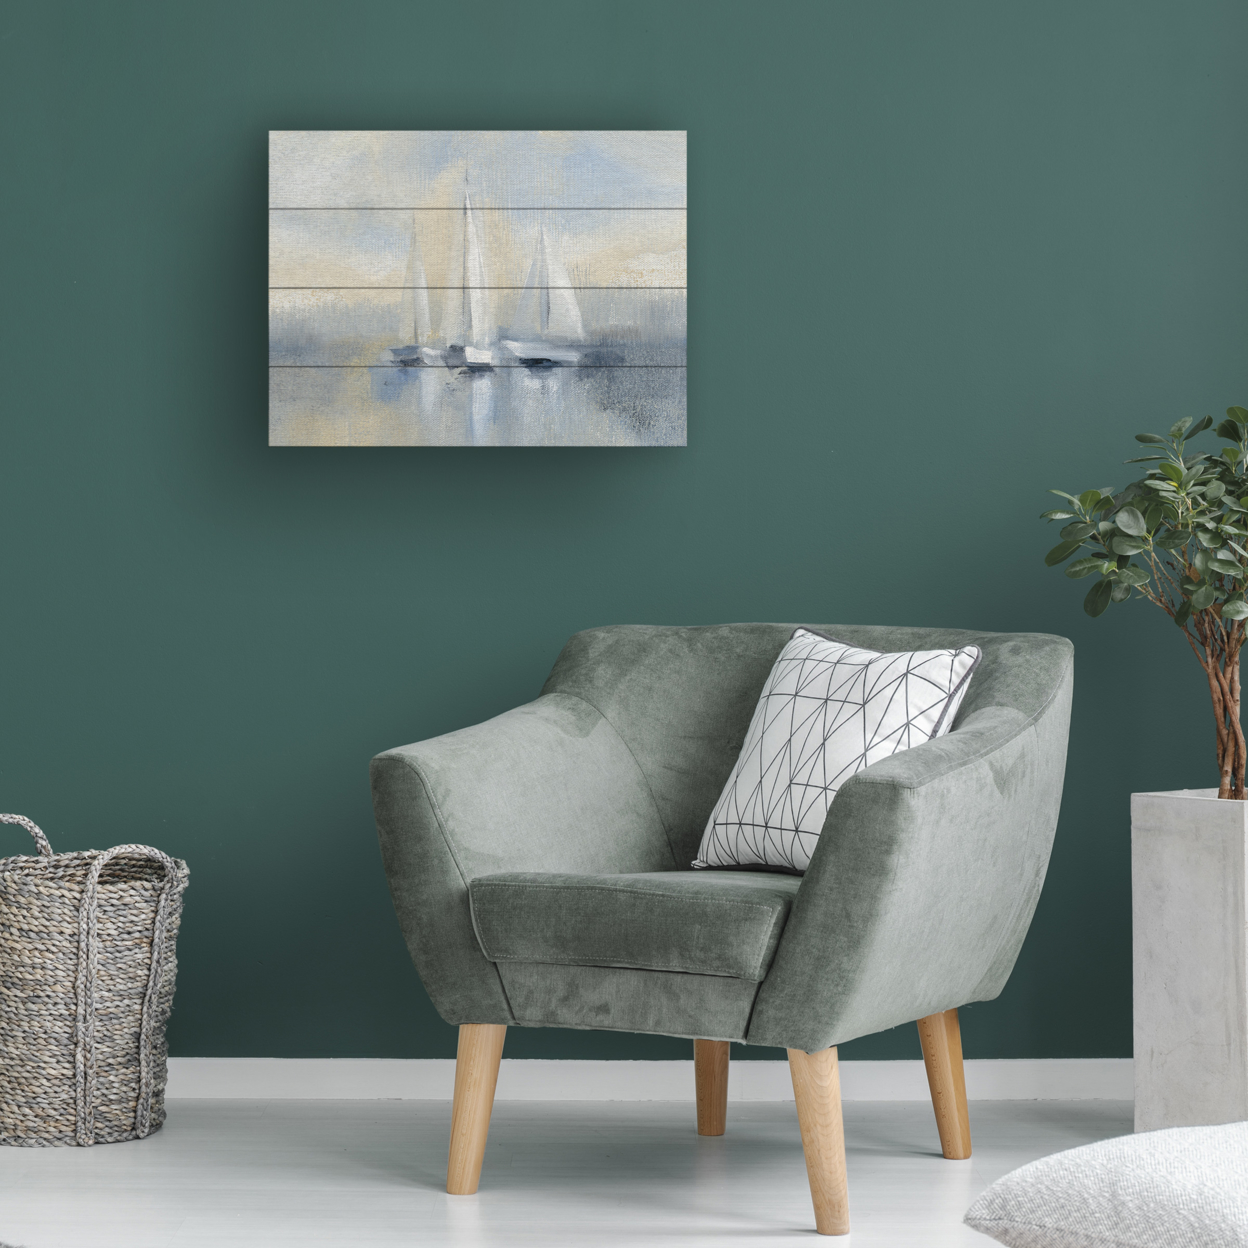 Wall Art 12 X 16 Inches Titled Morning Sail I Blue Ready To Hang Printed On Wooden Planks